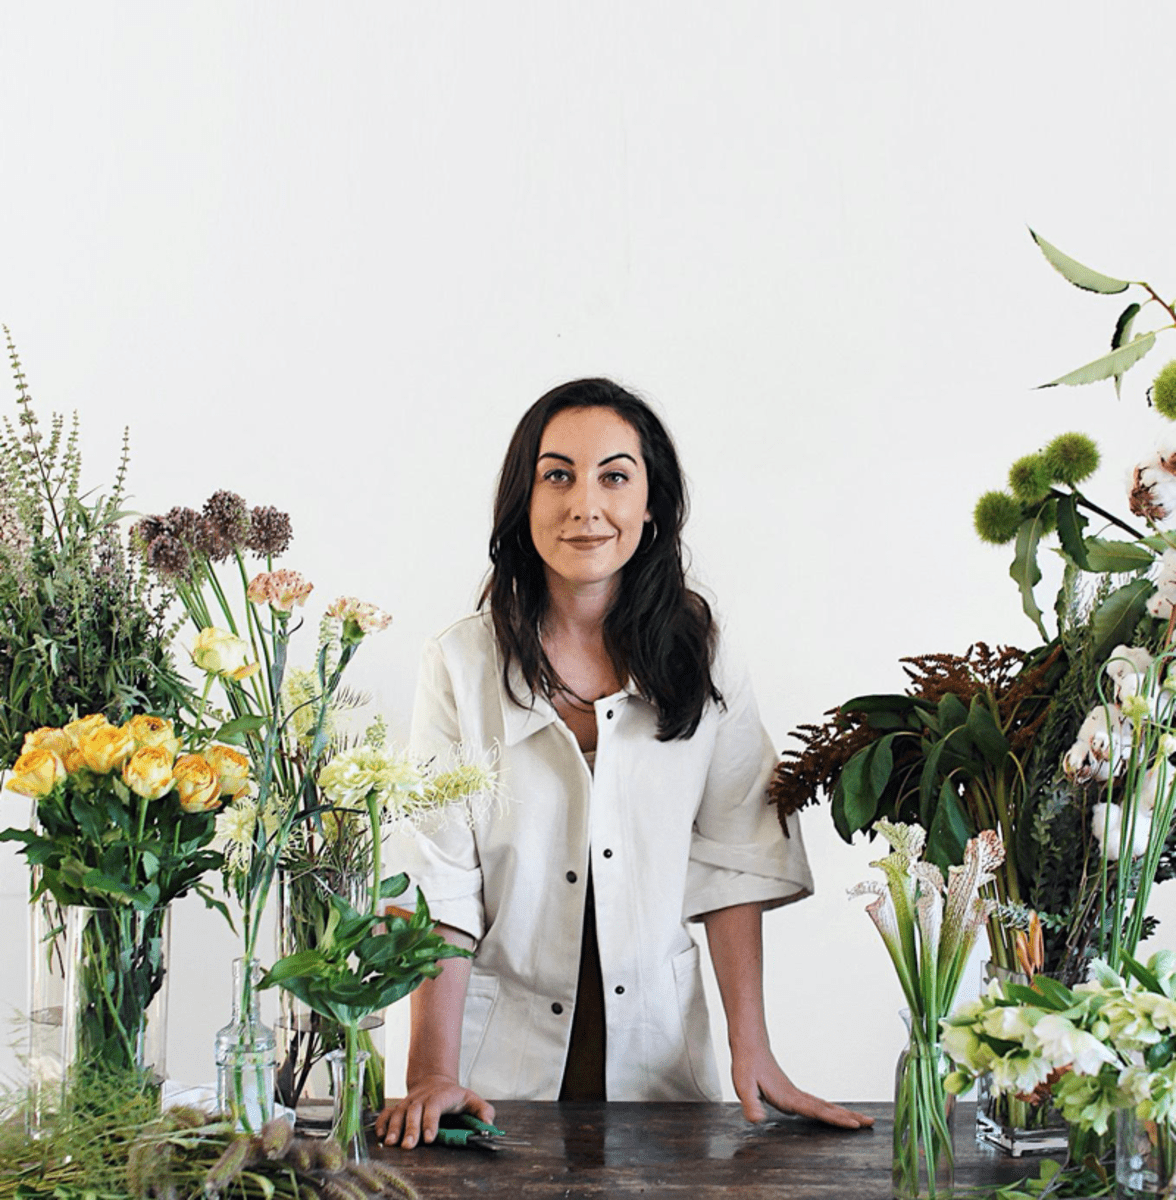 Women at Work: Storytelling with Floral Design